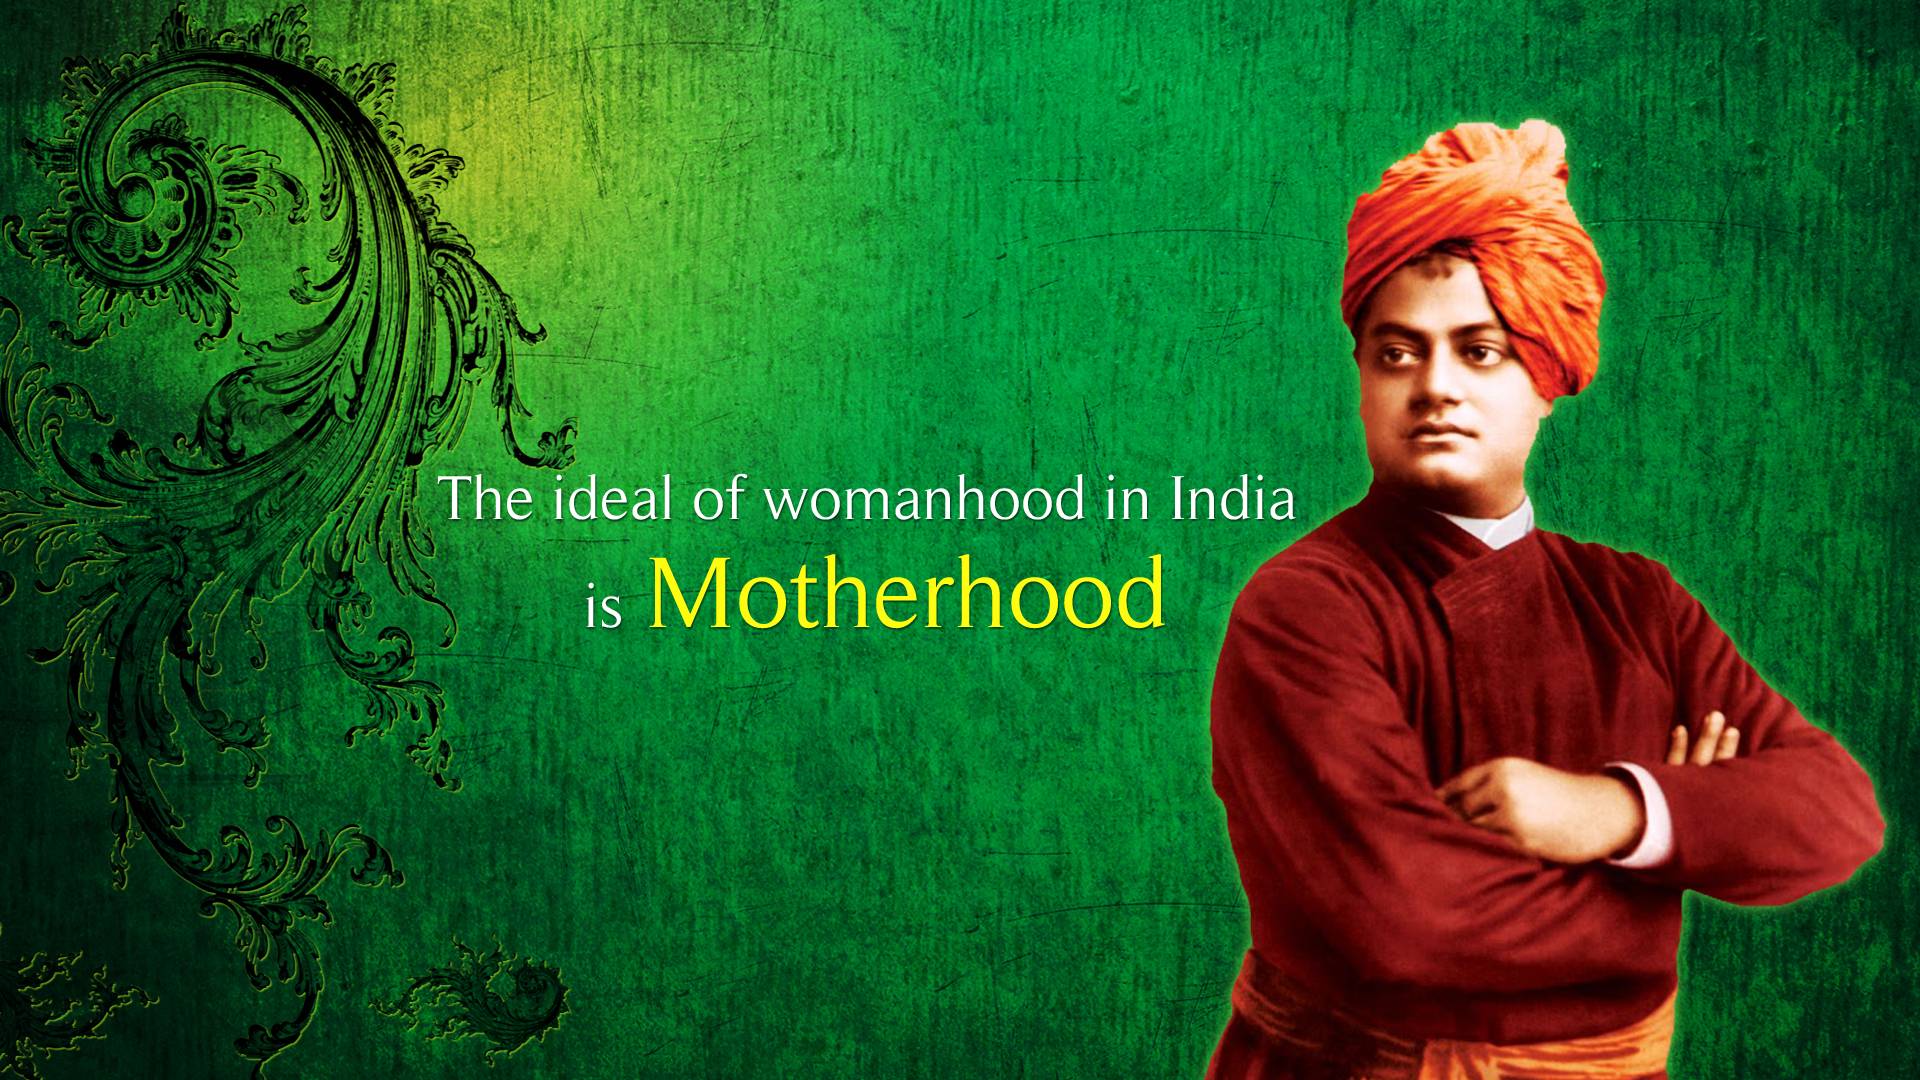 Swami Vivekananda Wallpapers APK for Android Download